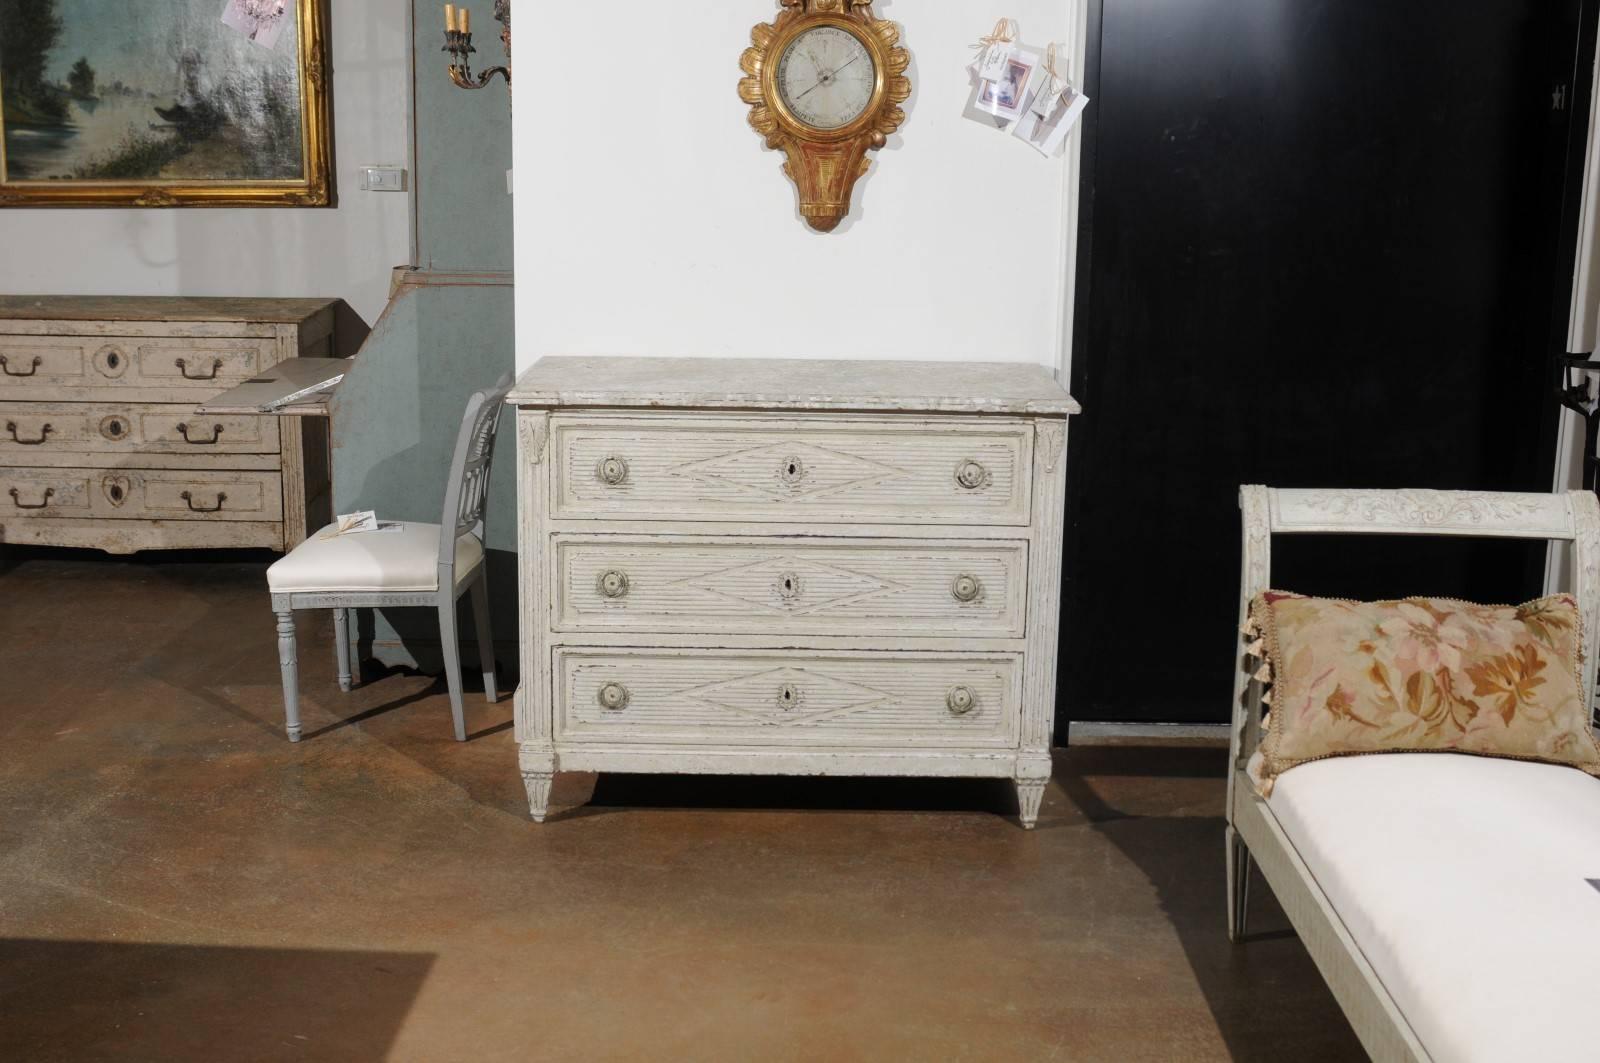 Wood Danish Neoclassical Period Three-Drawer Painted Commode with Diamond Motifs